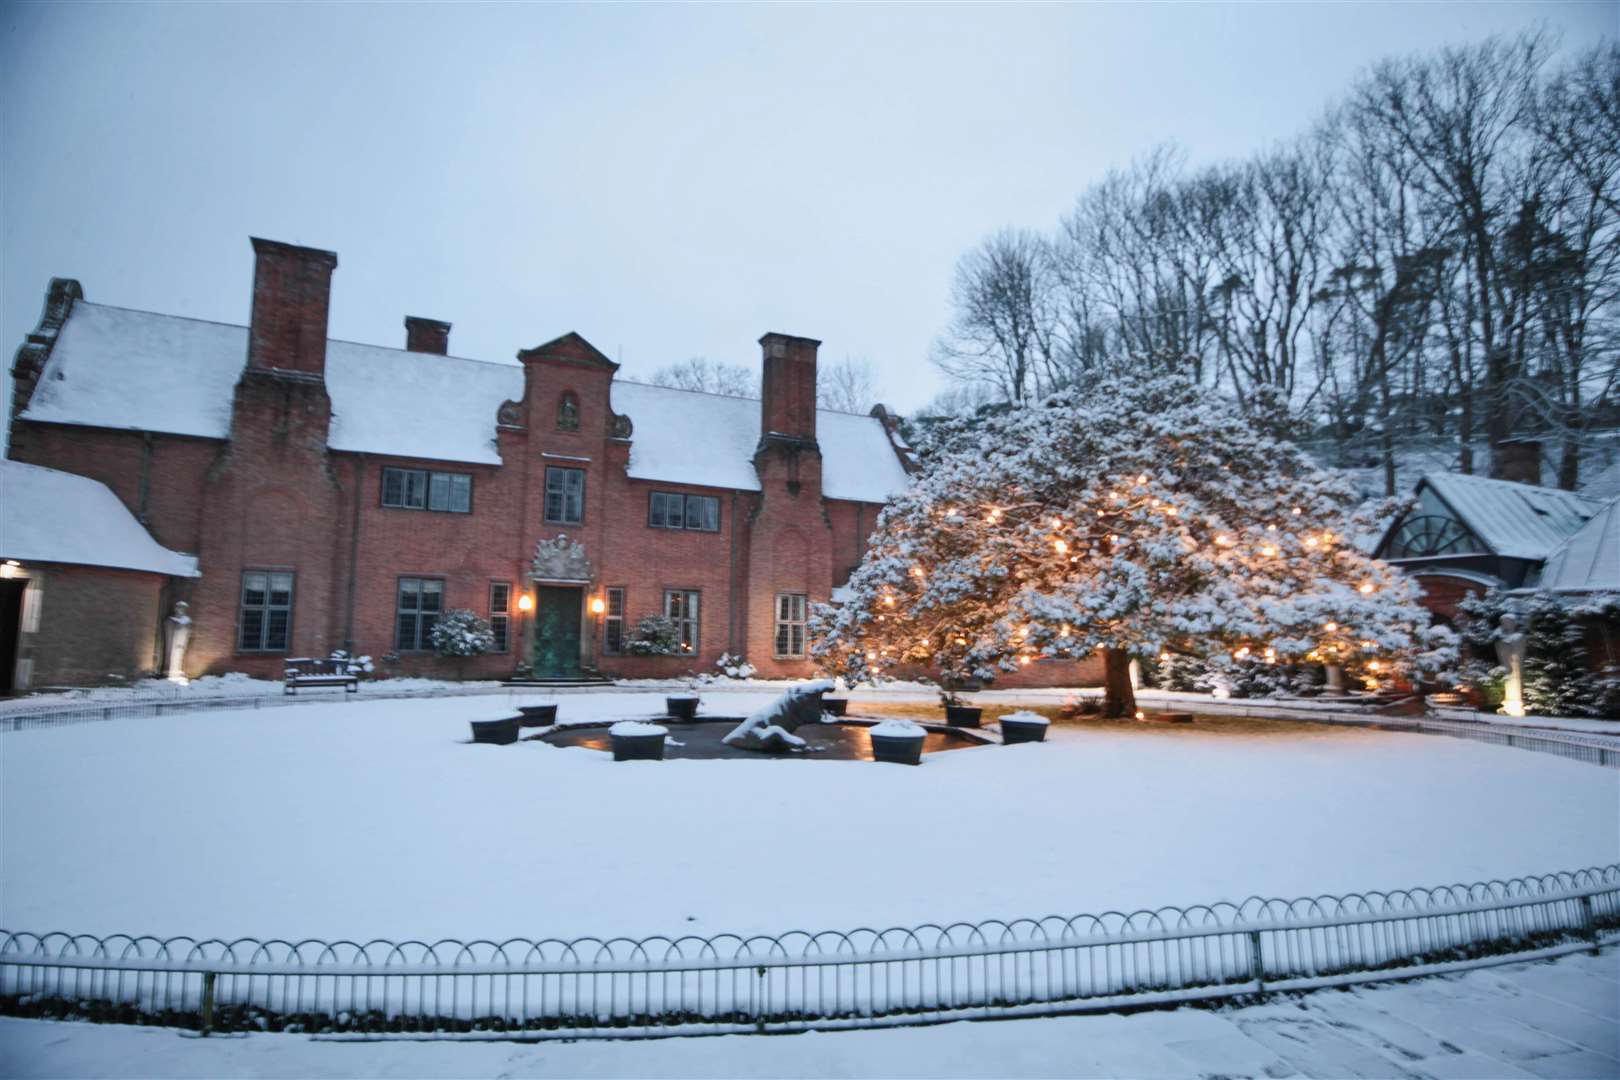 The grounds of Port Lympne covered in snow. Pictures: David Rolfee/Port Lympne